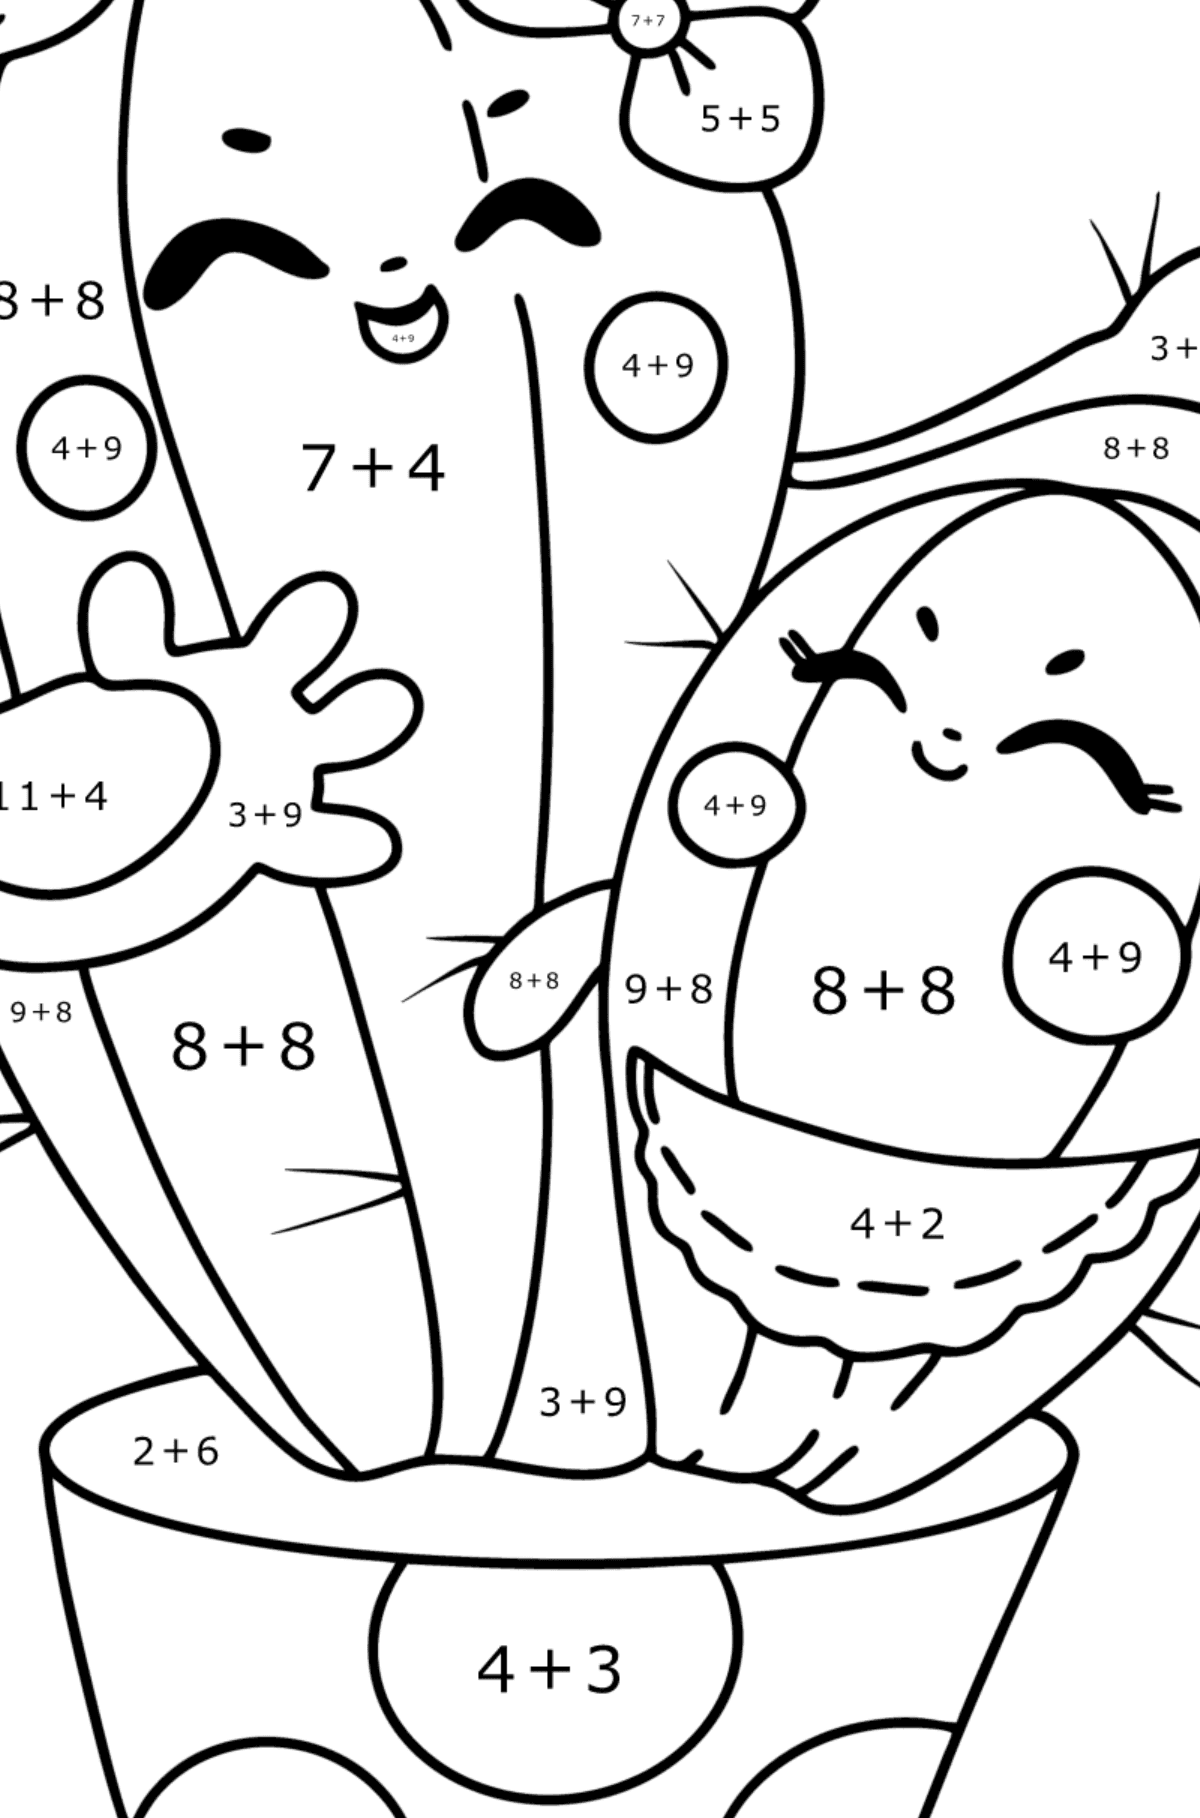 Cartoon Cactus coloring page - Math Coloring - Addition for Kids